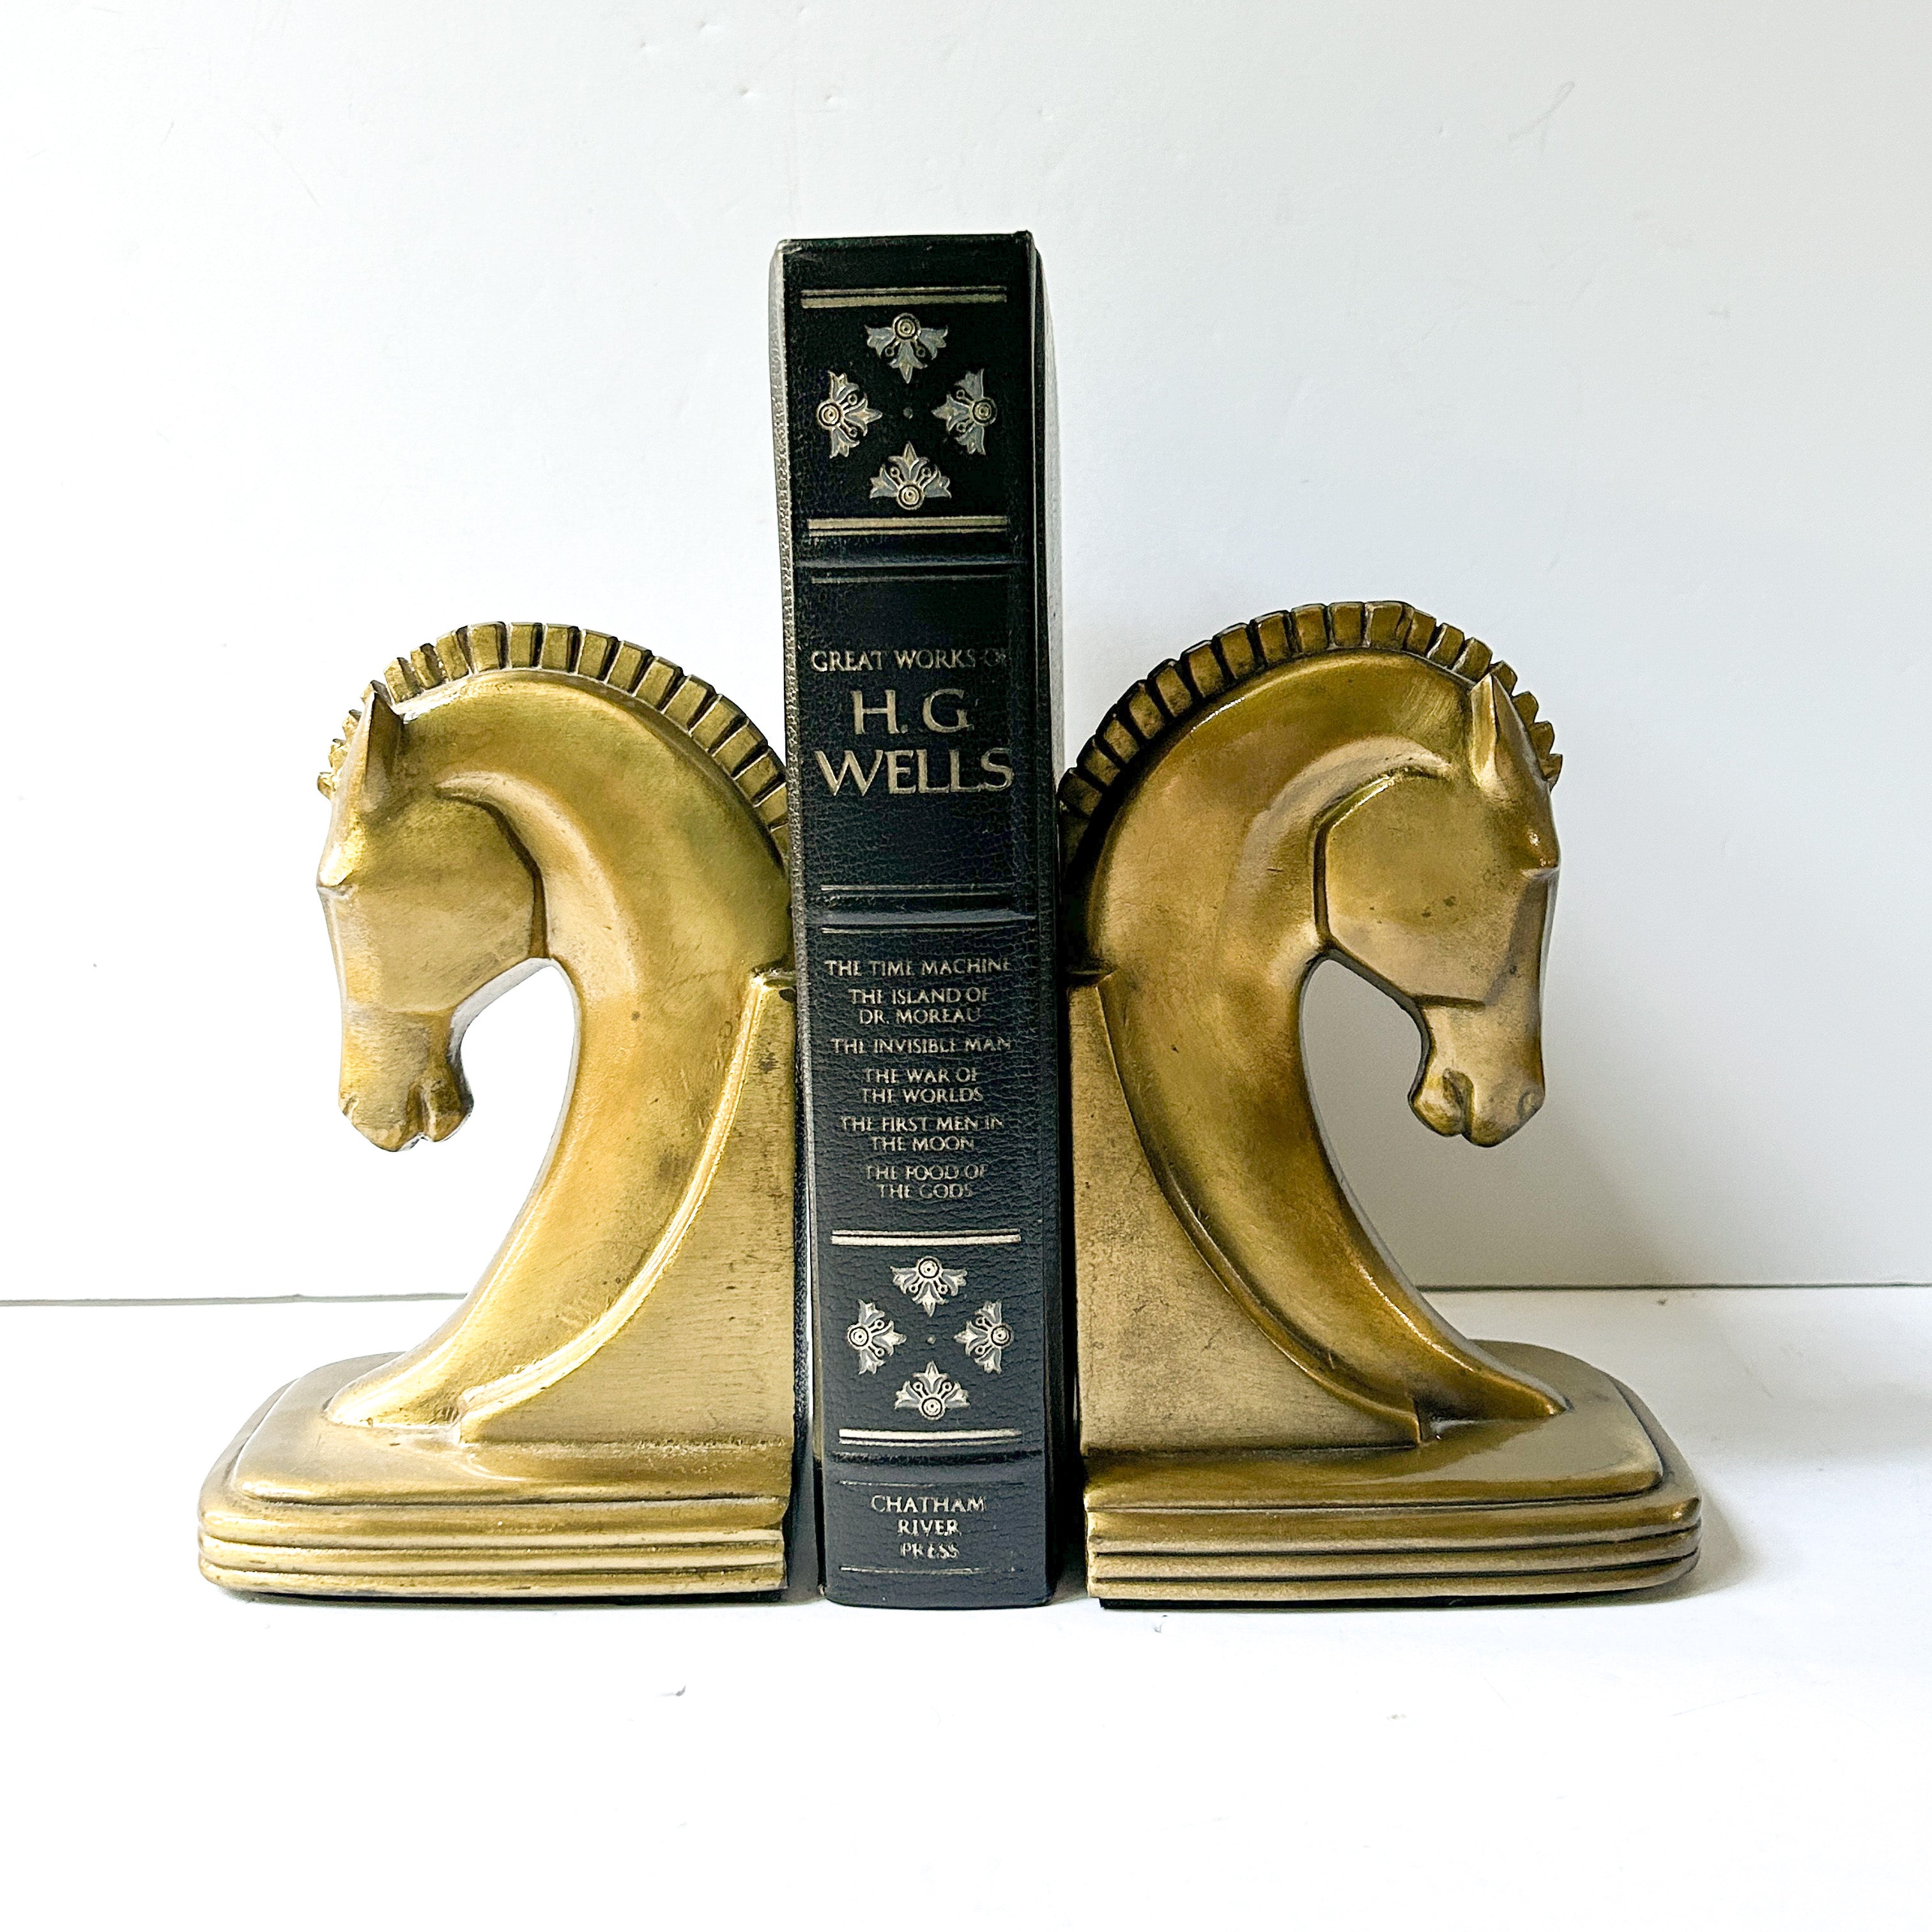 Vintage Art Deco Style Horse Head Bookends, Antiqued Brass Tone Lacque –  valerietylercollection